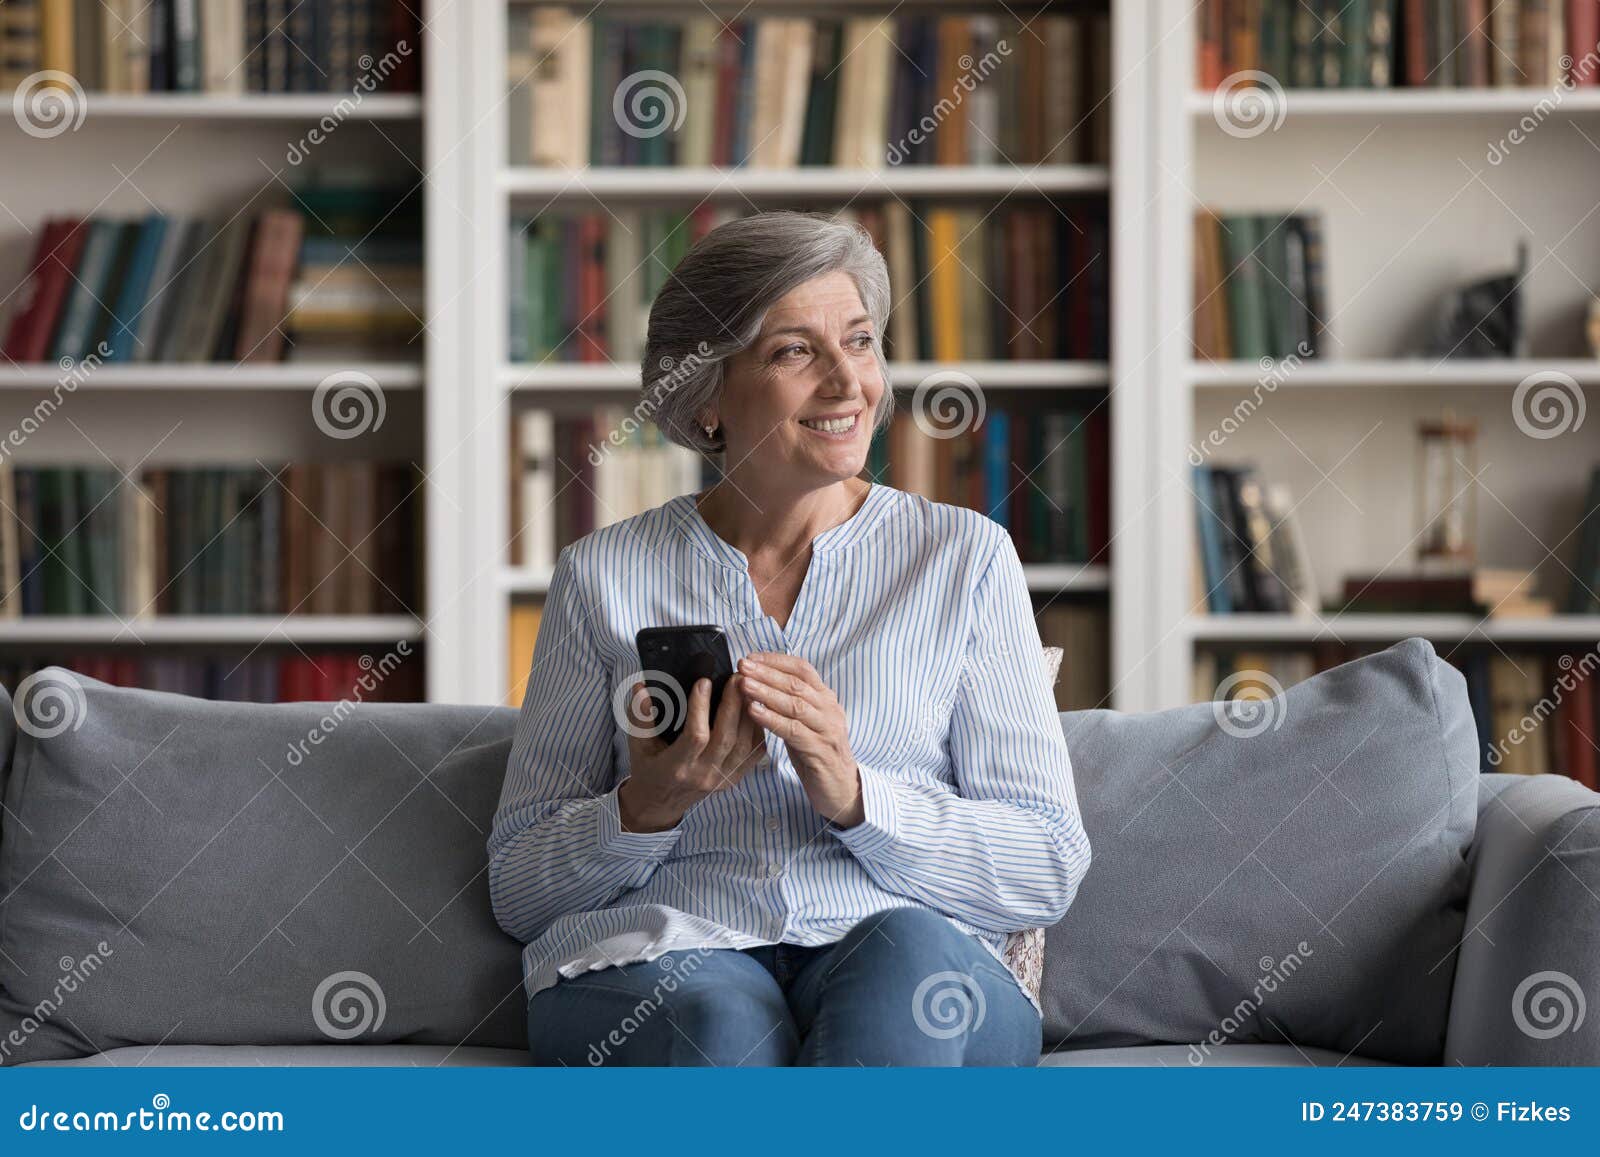 Happy Cheerful Older Grey Haired Woman Holding Cellphone Stock Image Image Of Cellphone Tech